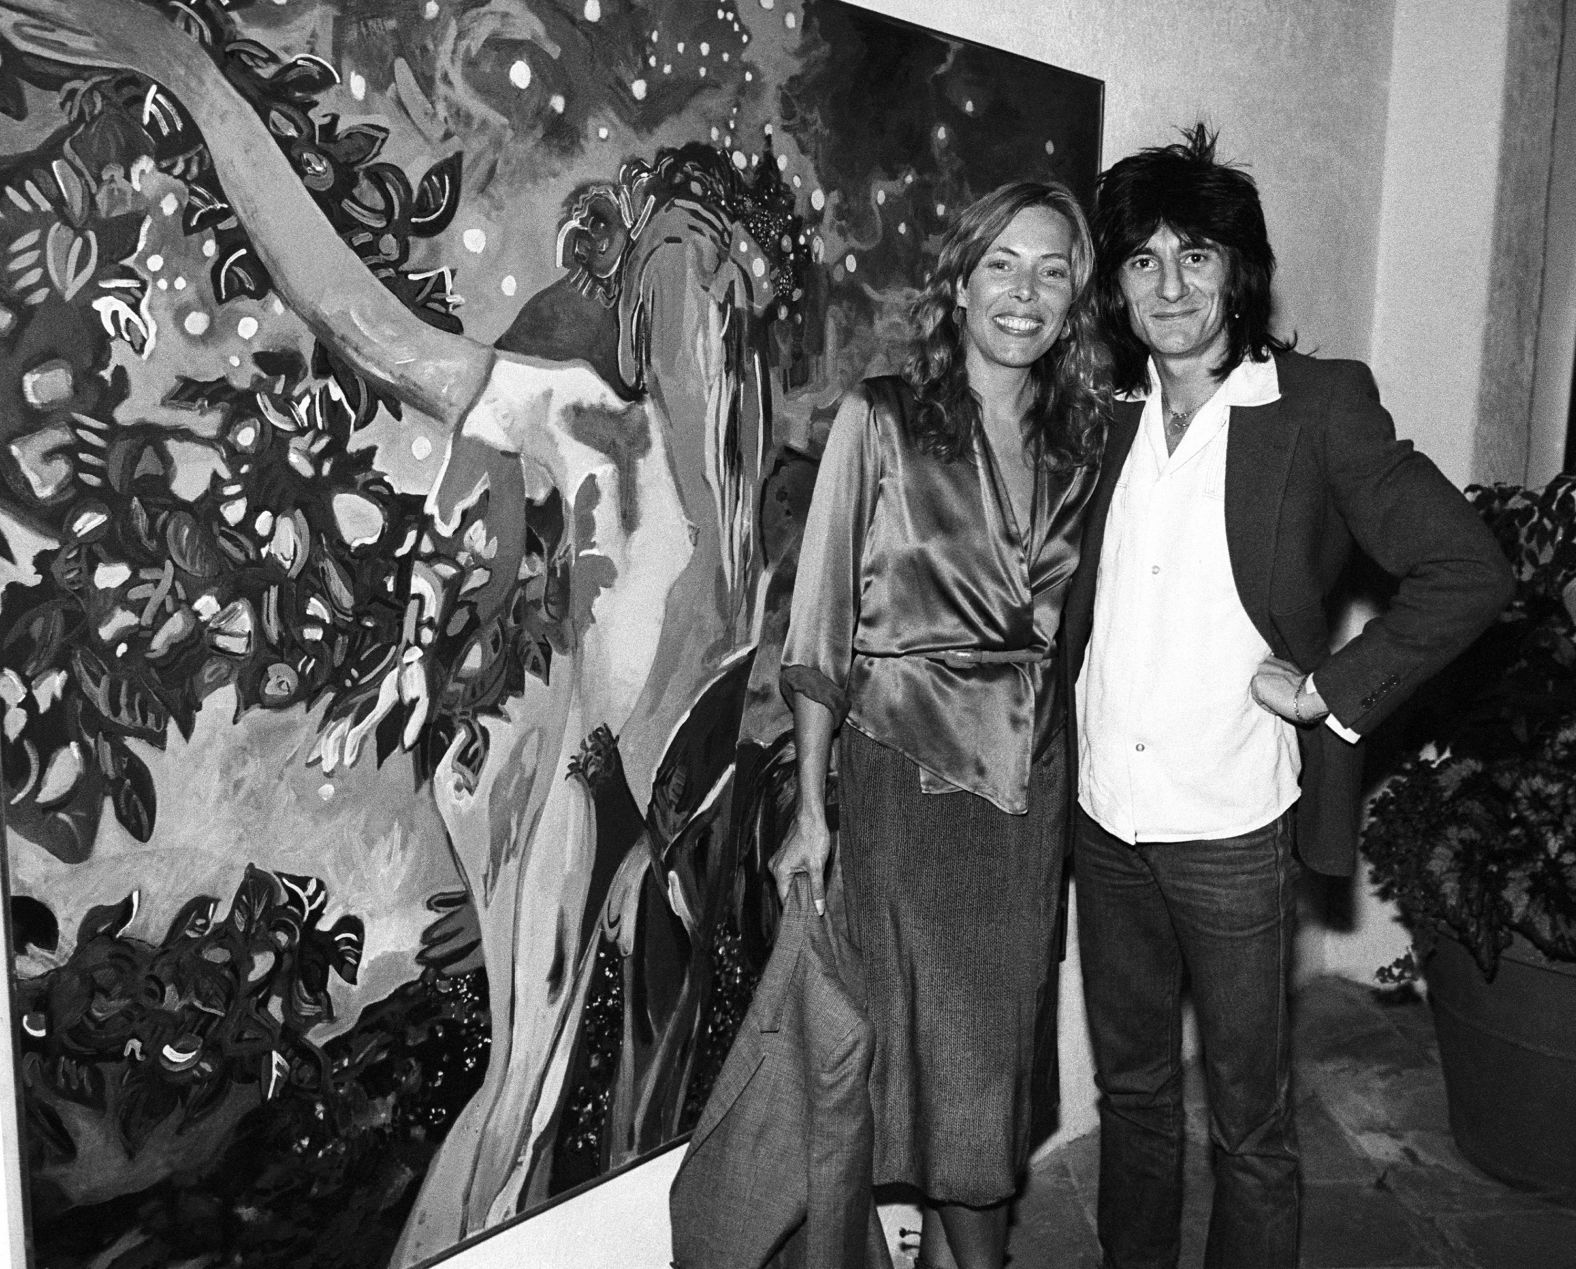 The Rolling Stones guitarist Ronnie Wood joins Mitchell at one of her art exhibitions in Los Angeles, California, in 1977. Mitchell's paintings and drawings have been featured on some of her album covers, as well as those of Crosby, Stills, Nash and Young.